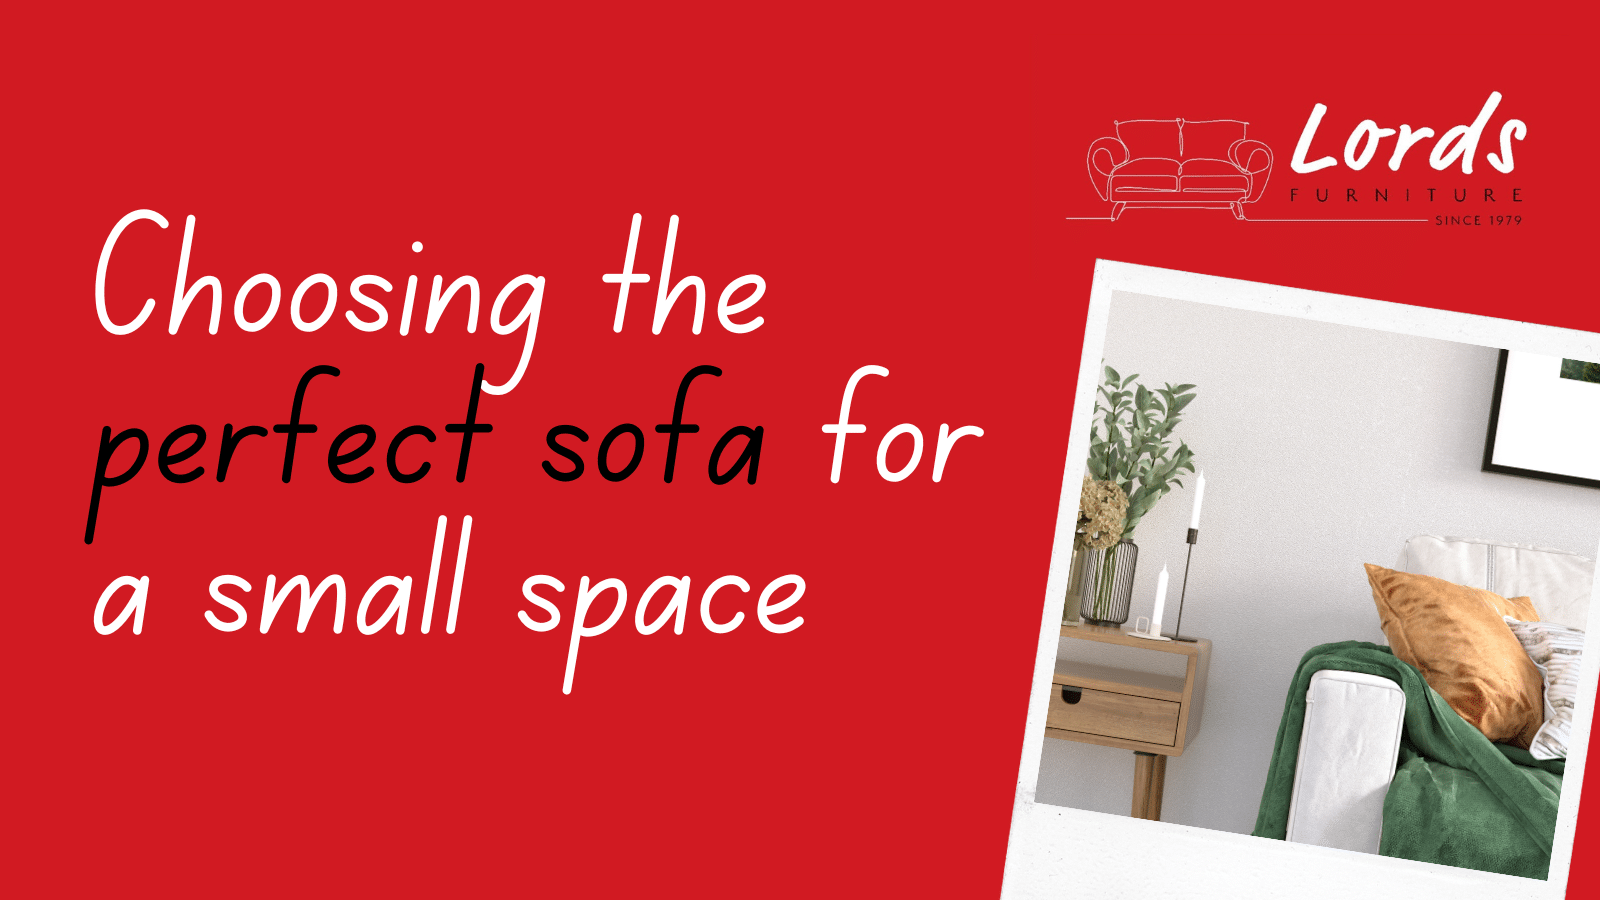 Choosing the perfect sofa for a small space